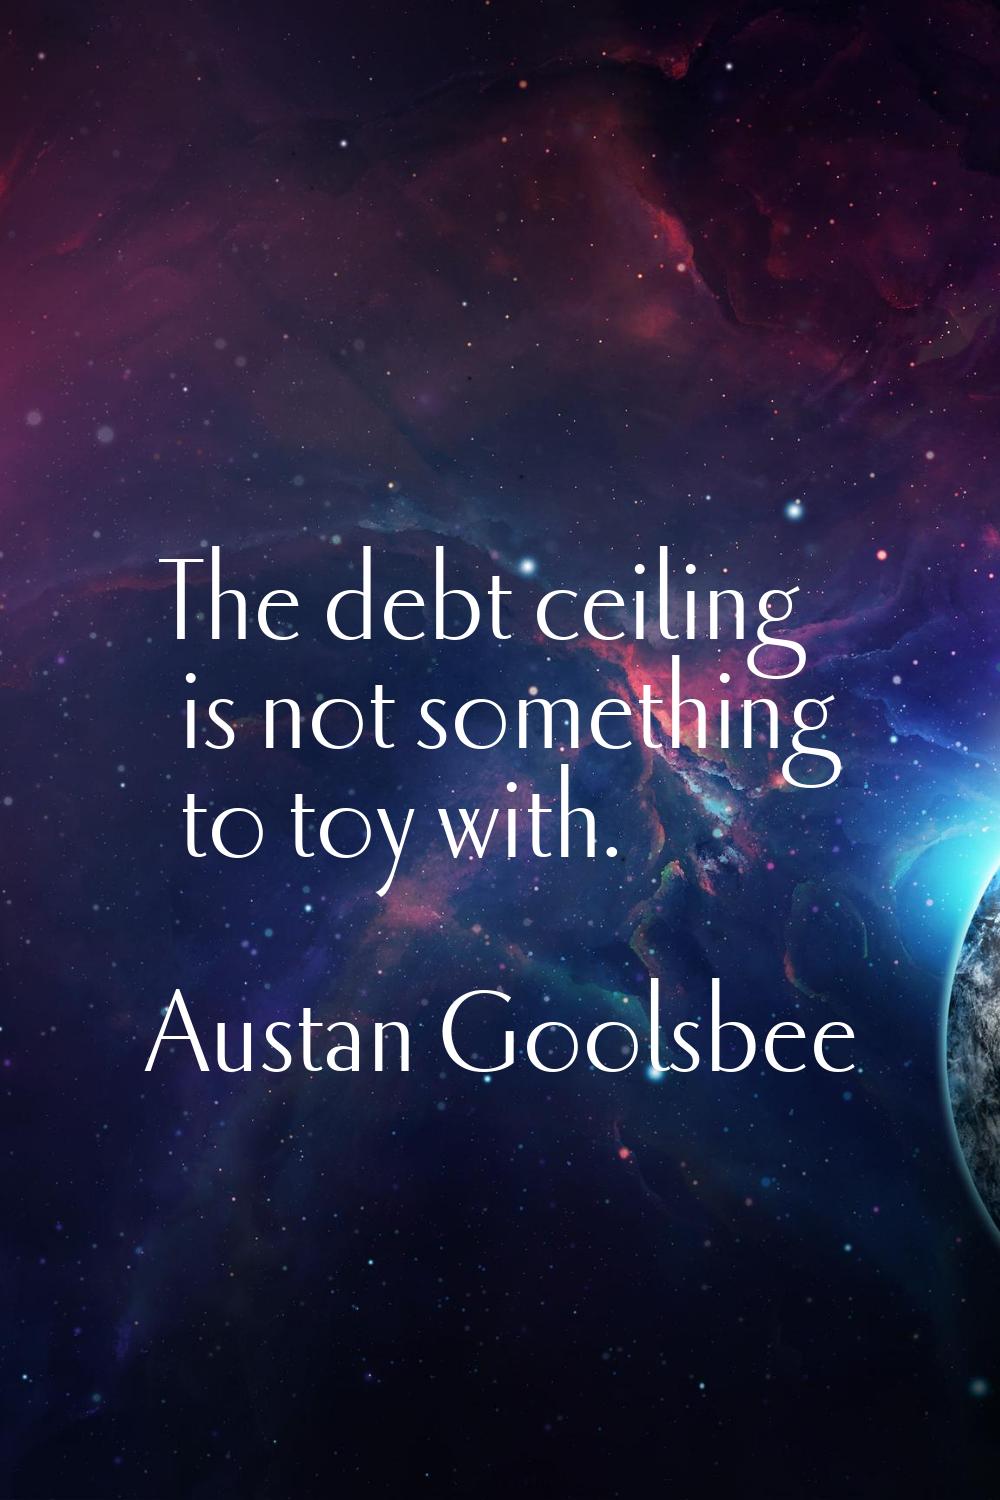 The debt ceiling is not something to toy with.